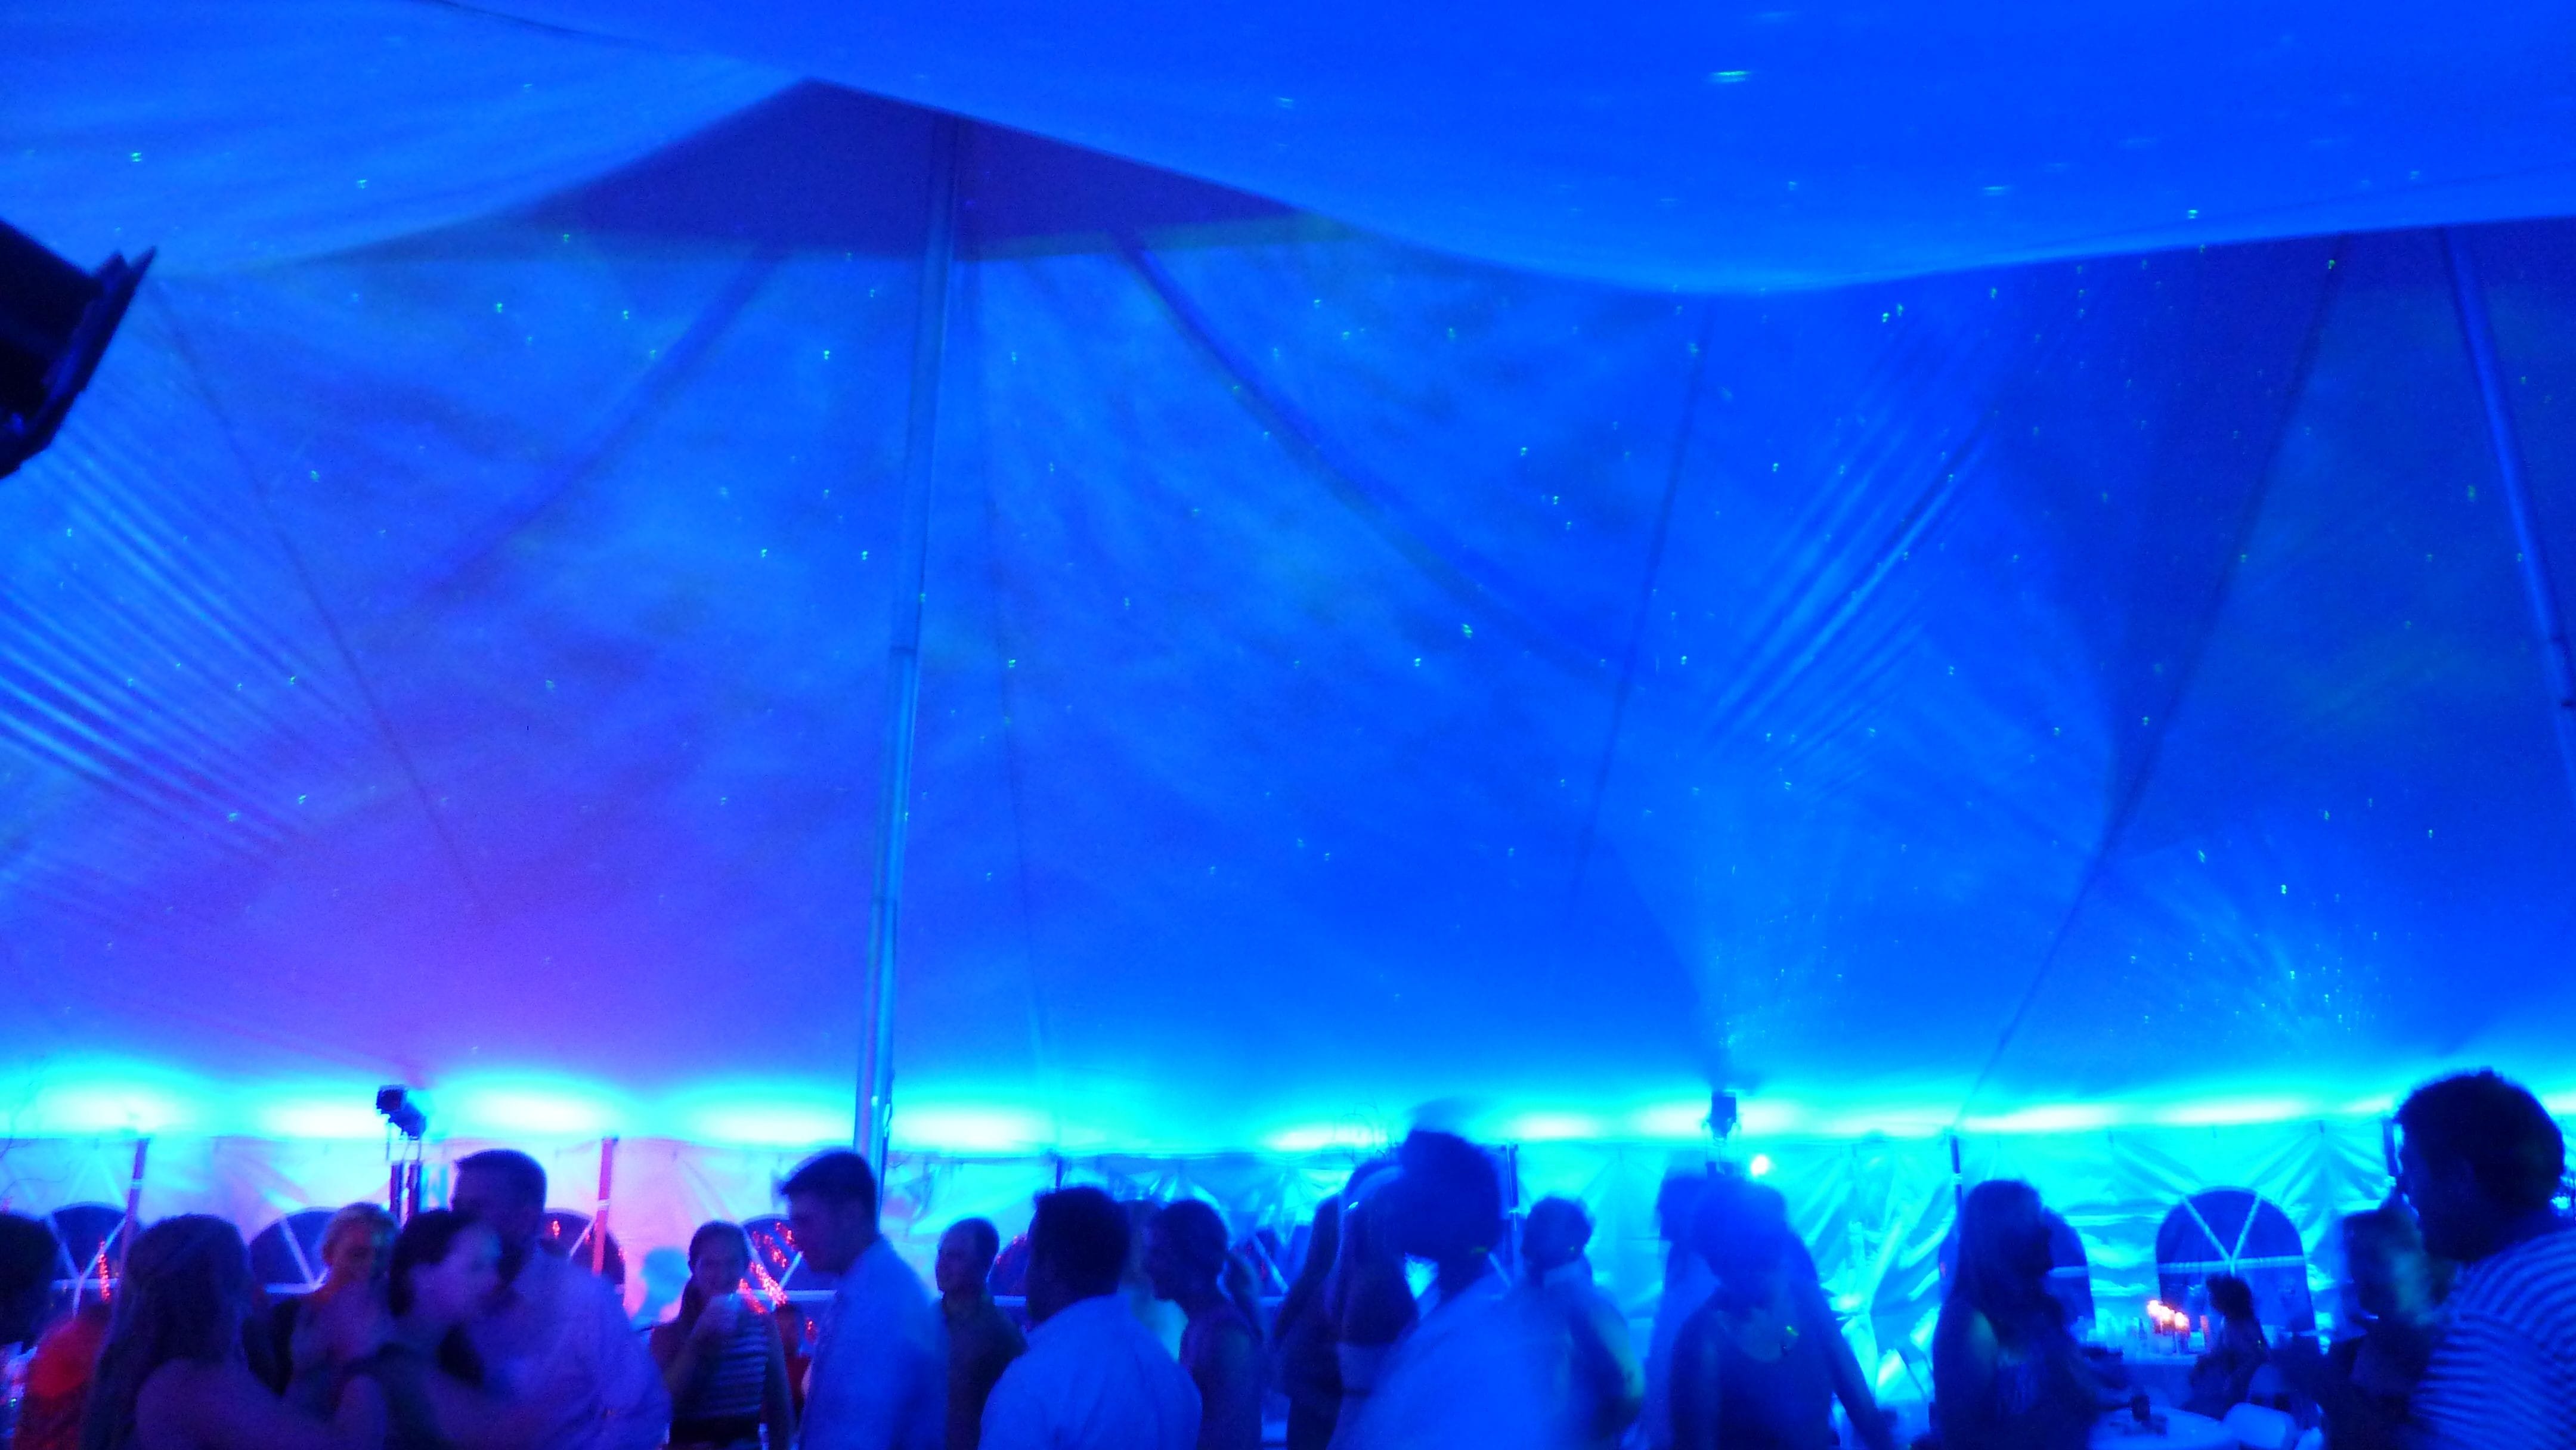 Tent wedding lighting. Up lighting in blue. Stars and Northern Lights dancing on the ceiling.